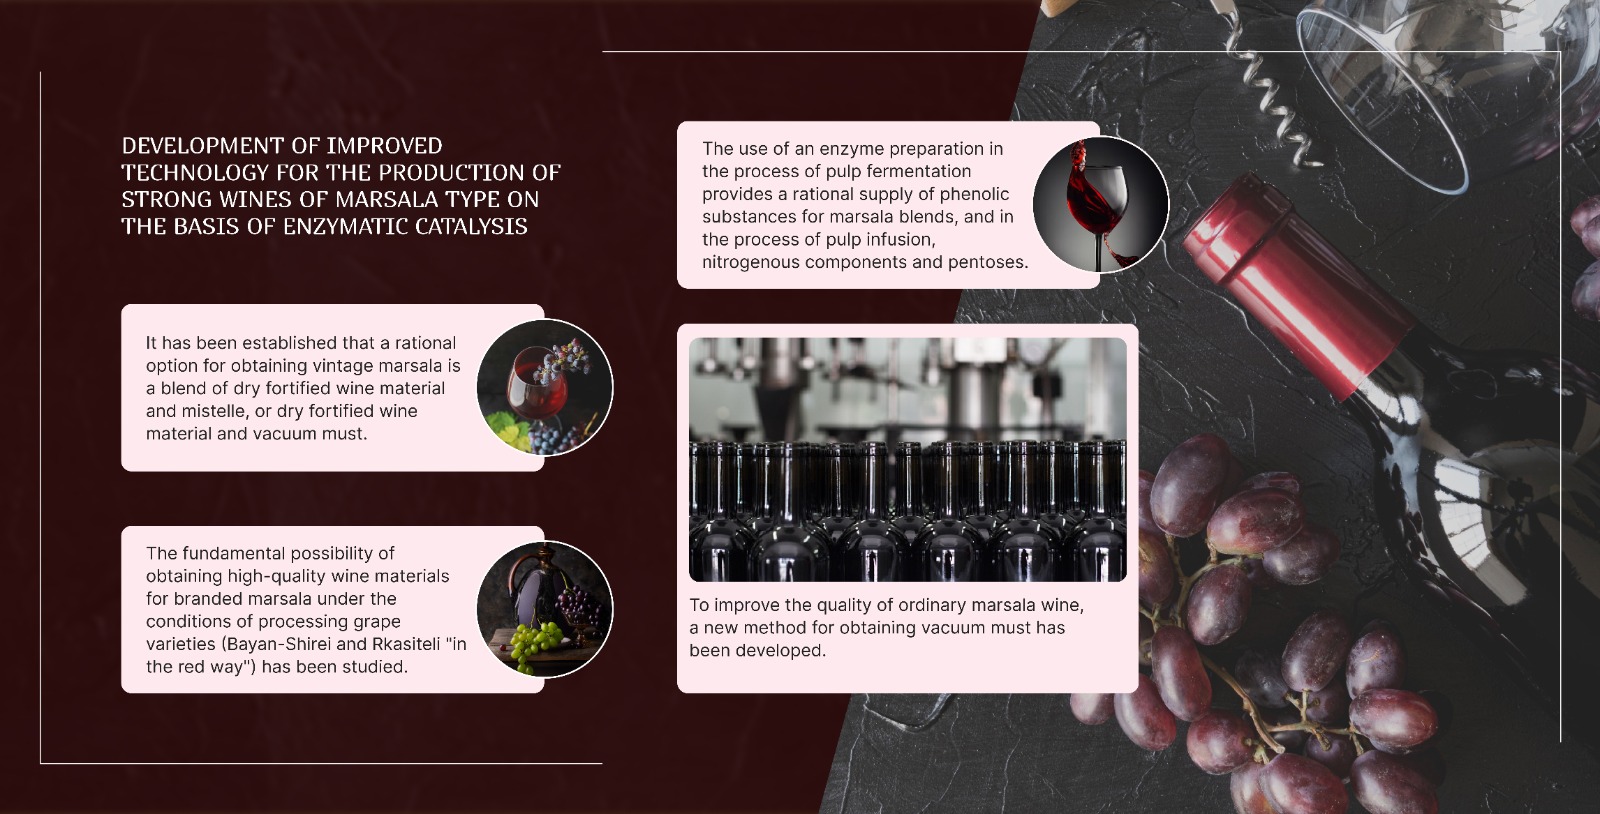 Development of improved technology for the production of strong wines of marsala type on the basis of enzymatic catalysis